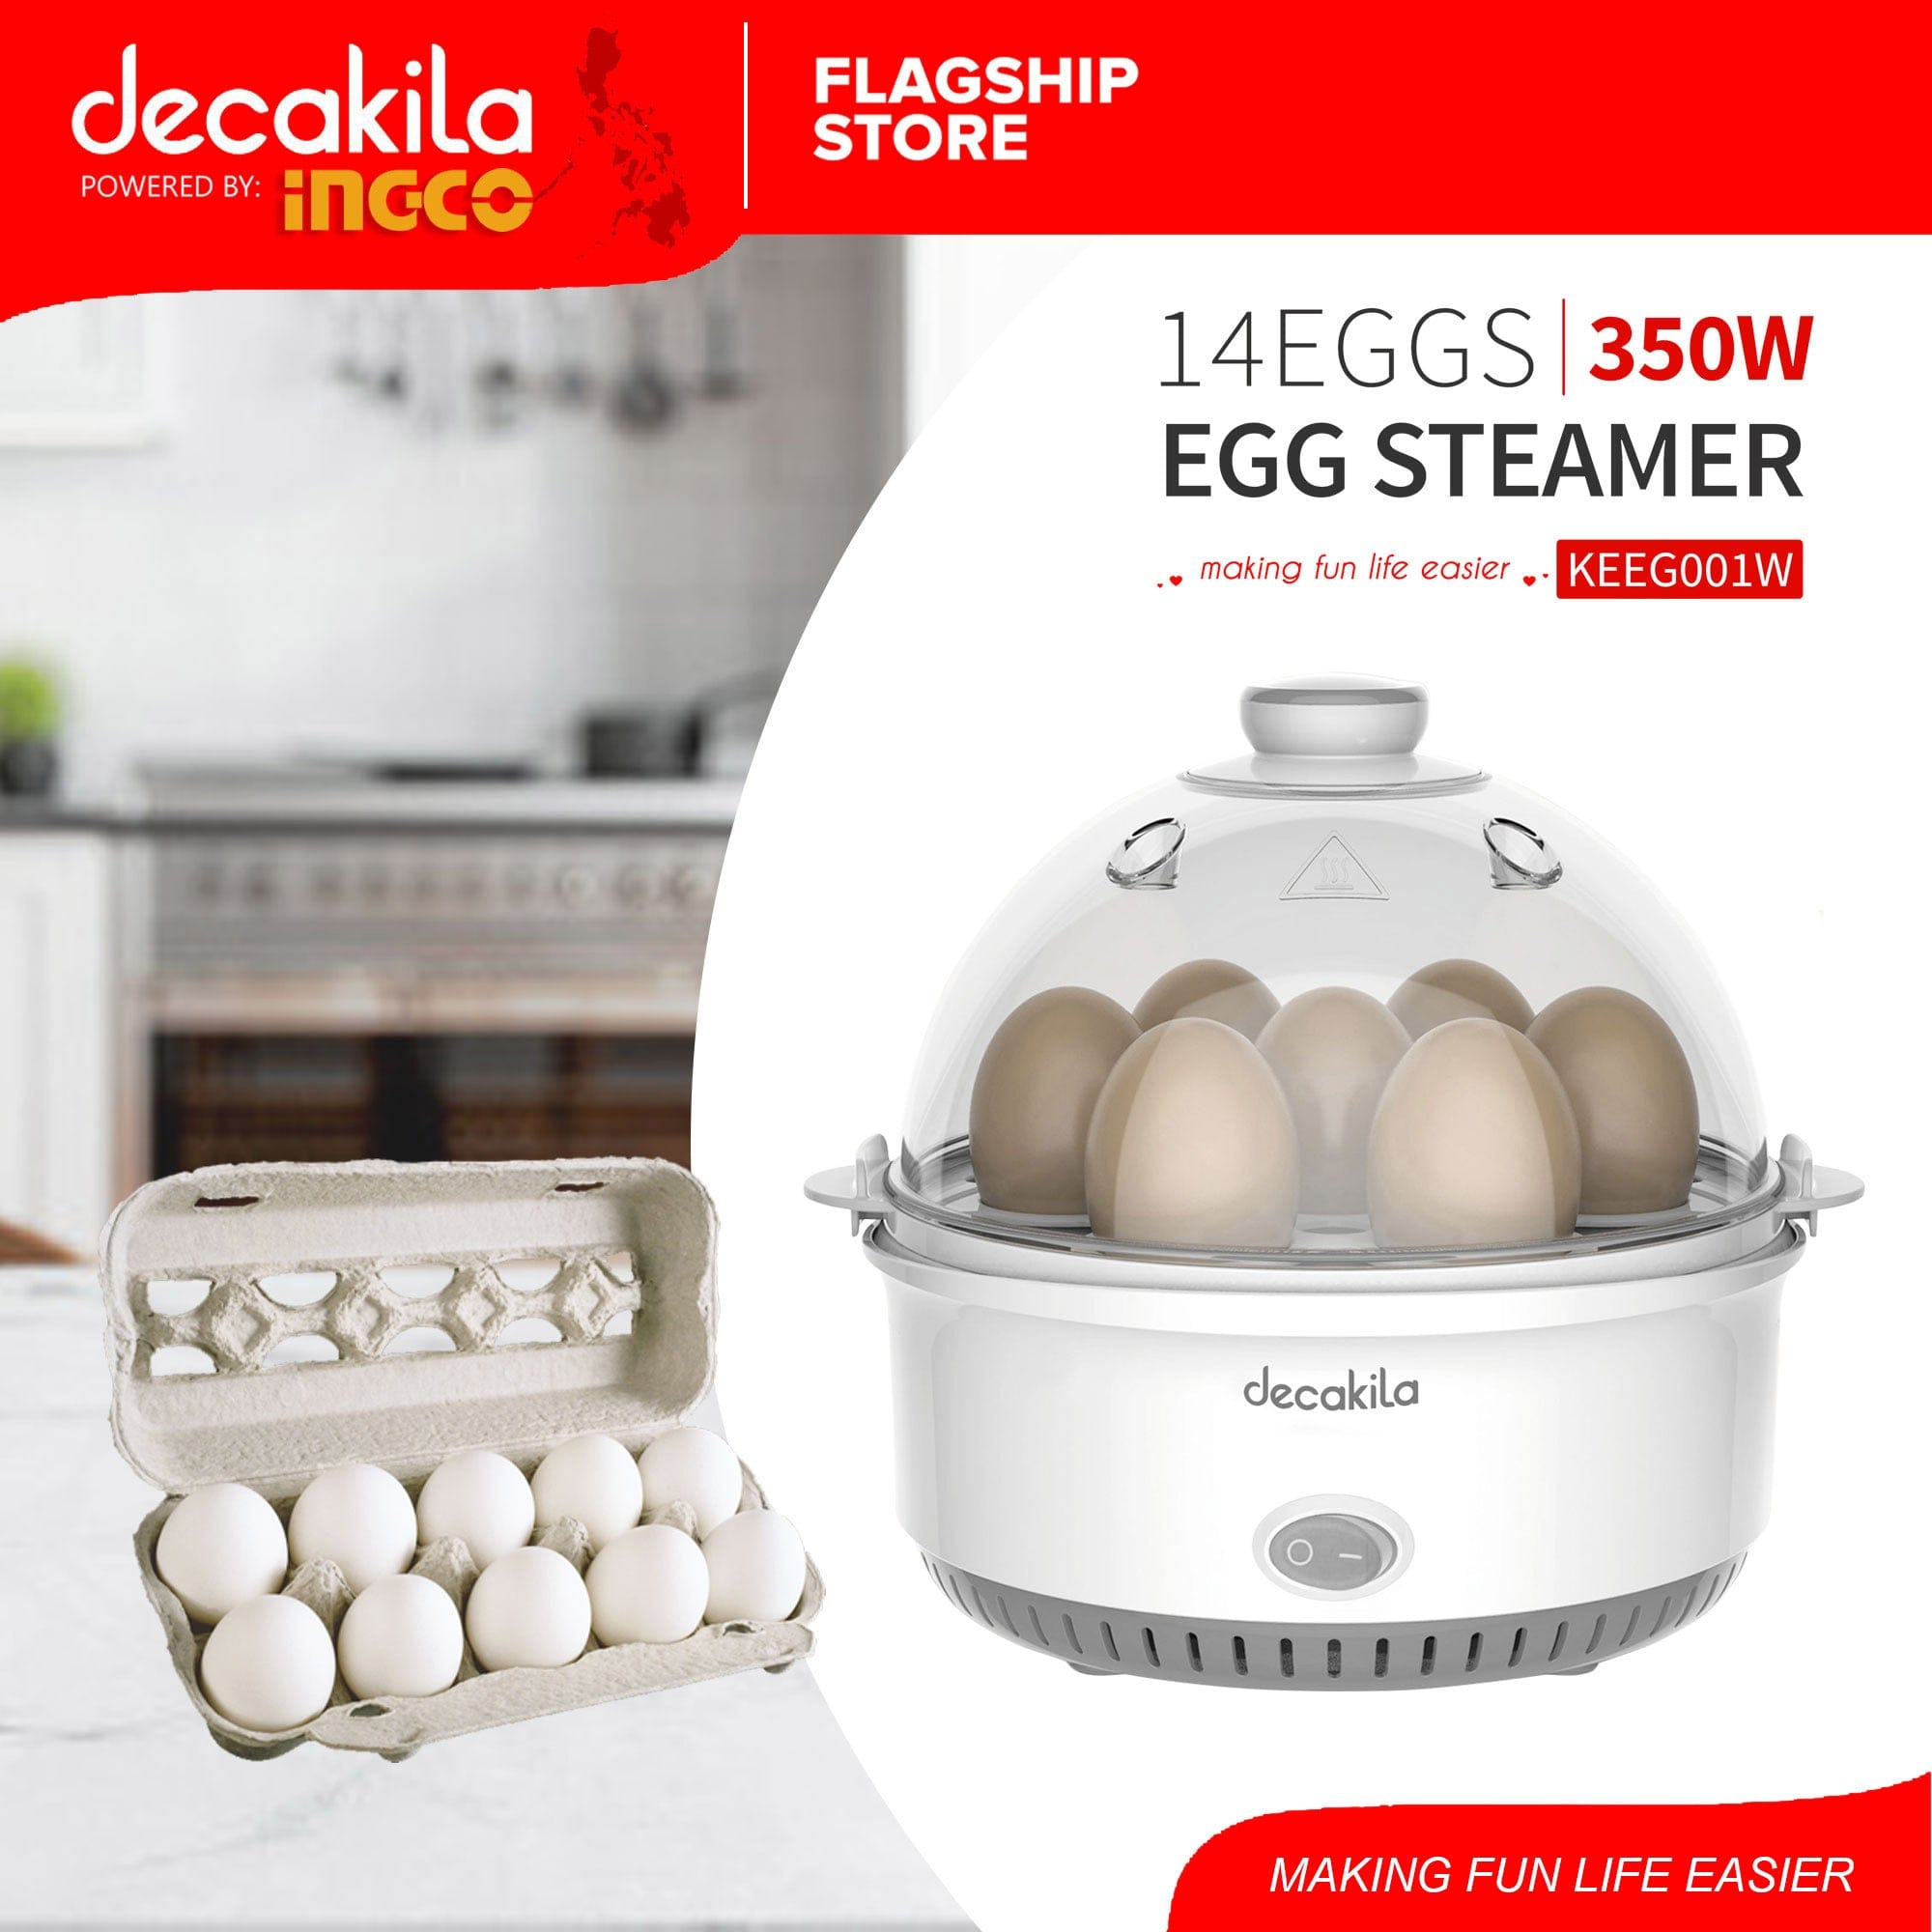 Buy Decakila Egg Cooker 350W - KEEG001W in Ghana | Supply Master Kitchen Appliances Buy Tools hardware Building materials